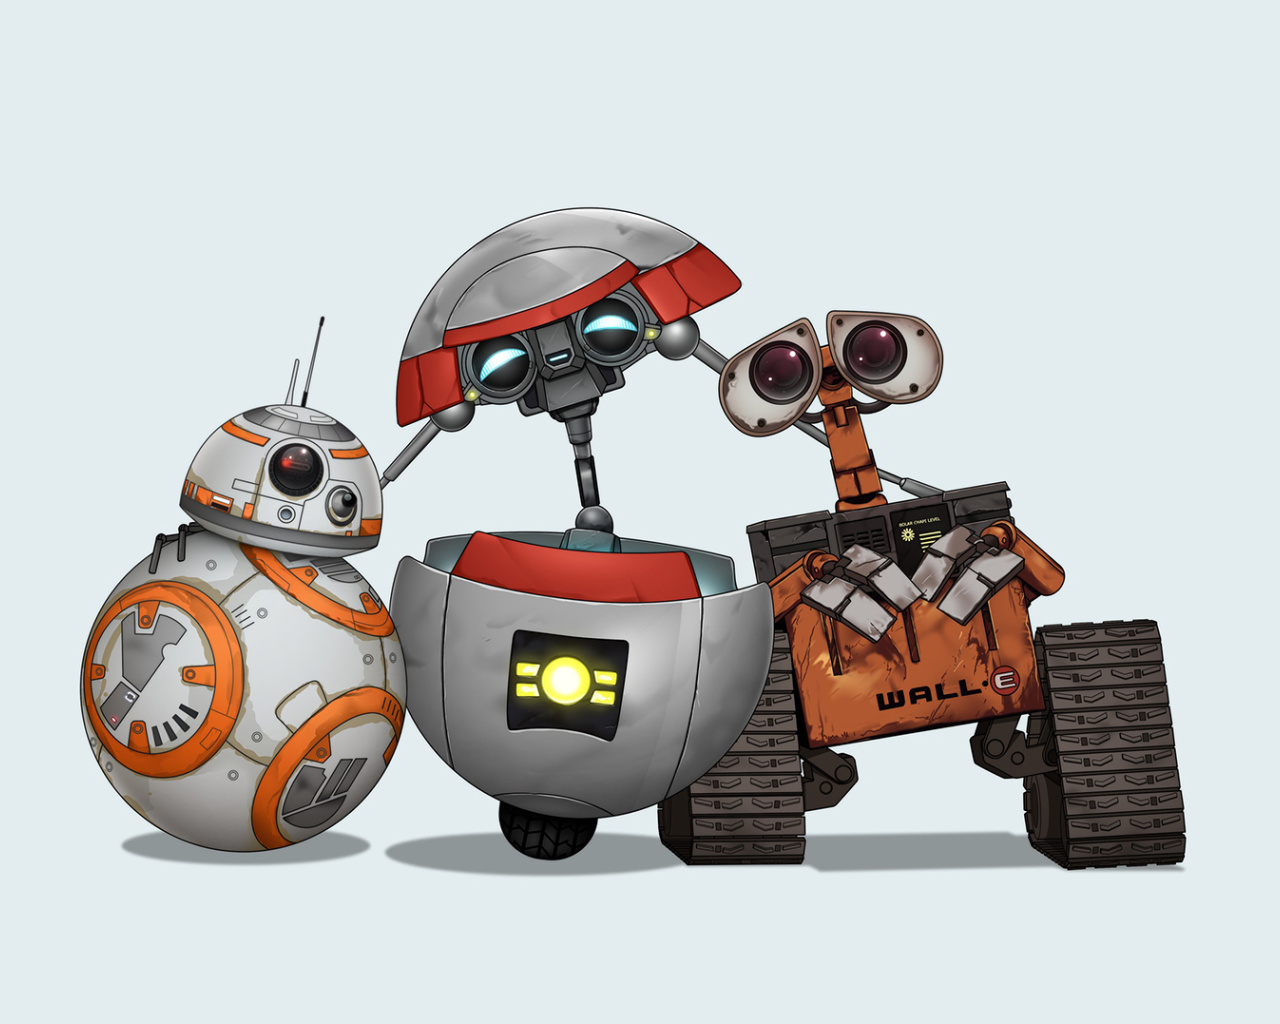 Star Wars and Walle wallpaper 1280x1024